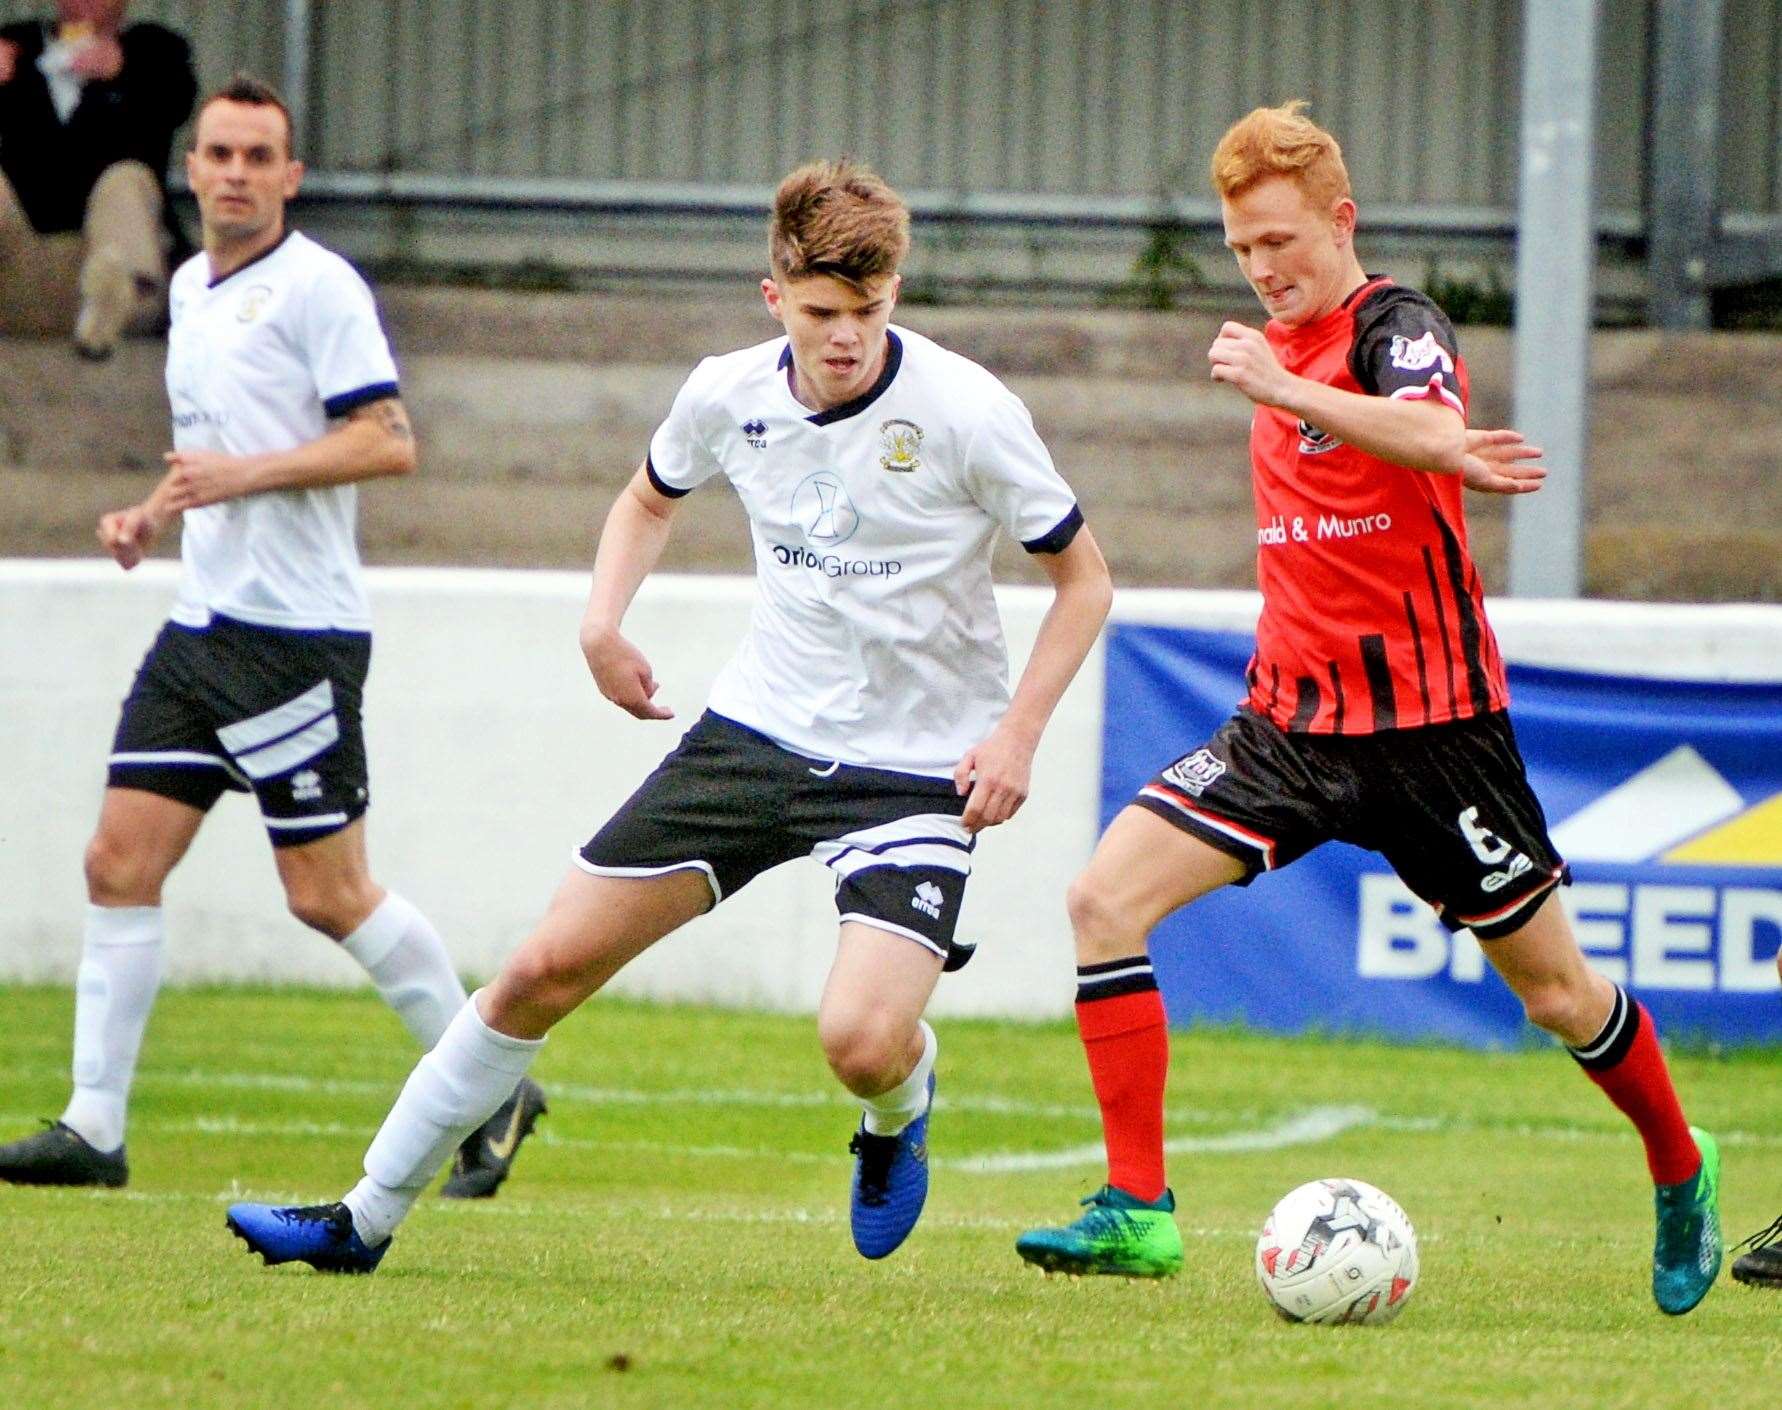 Clachnacuddin midfielder Eachainn Miller faces a six-hour round trip every match-day to play for the Lilywhites.